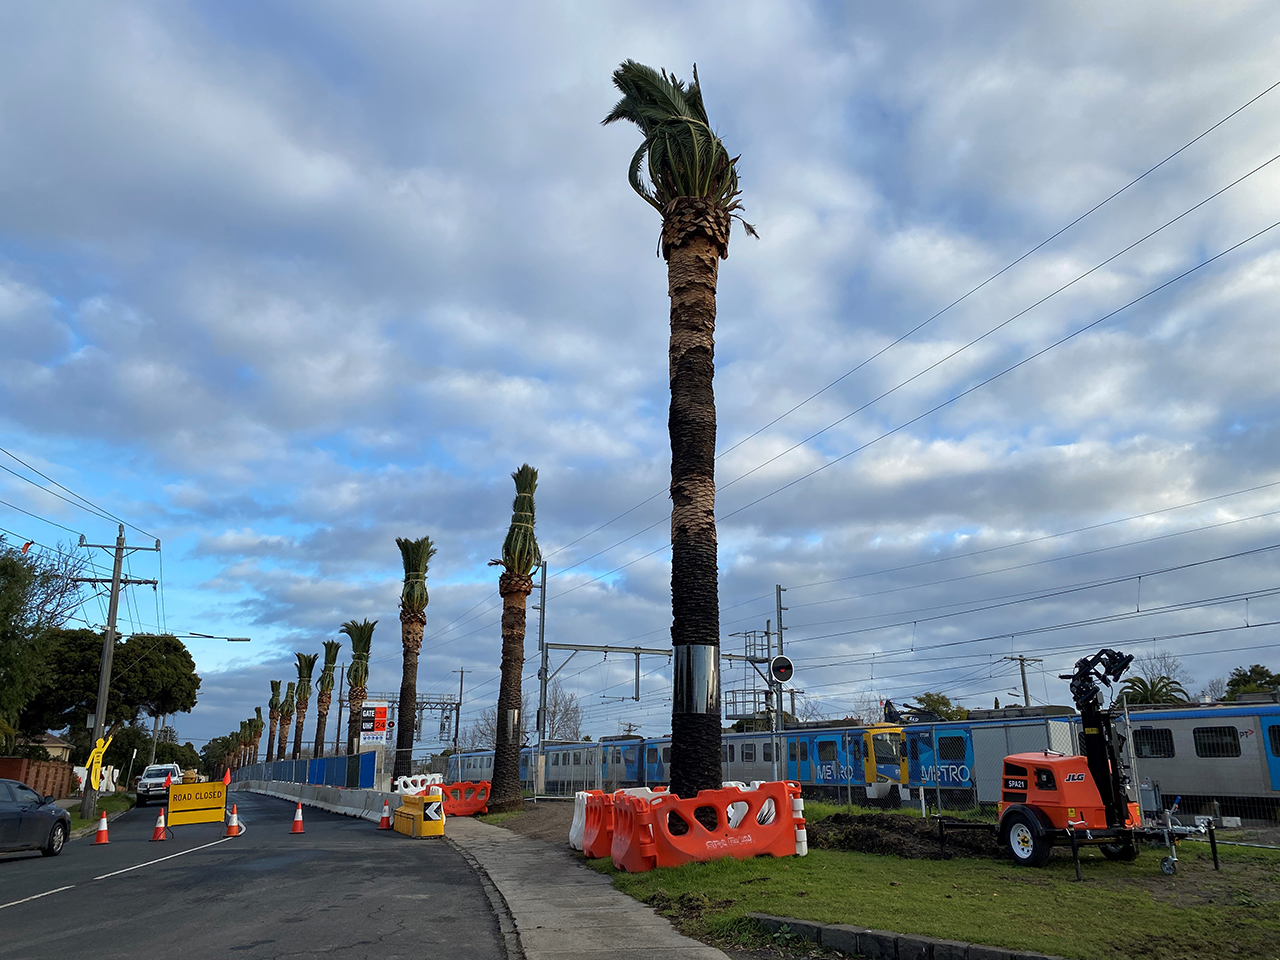 Canary Date Palms sporting an up-do while we prepare them for removal and safe-keeping until they can be replanted